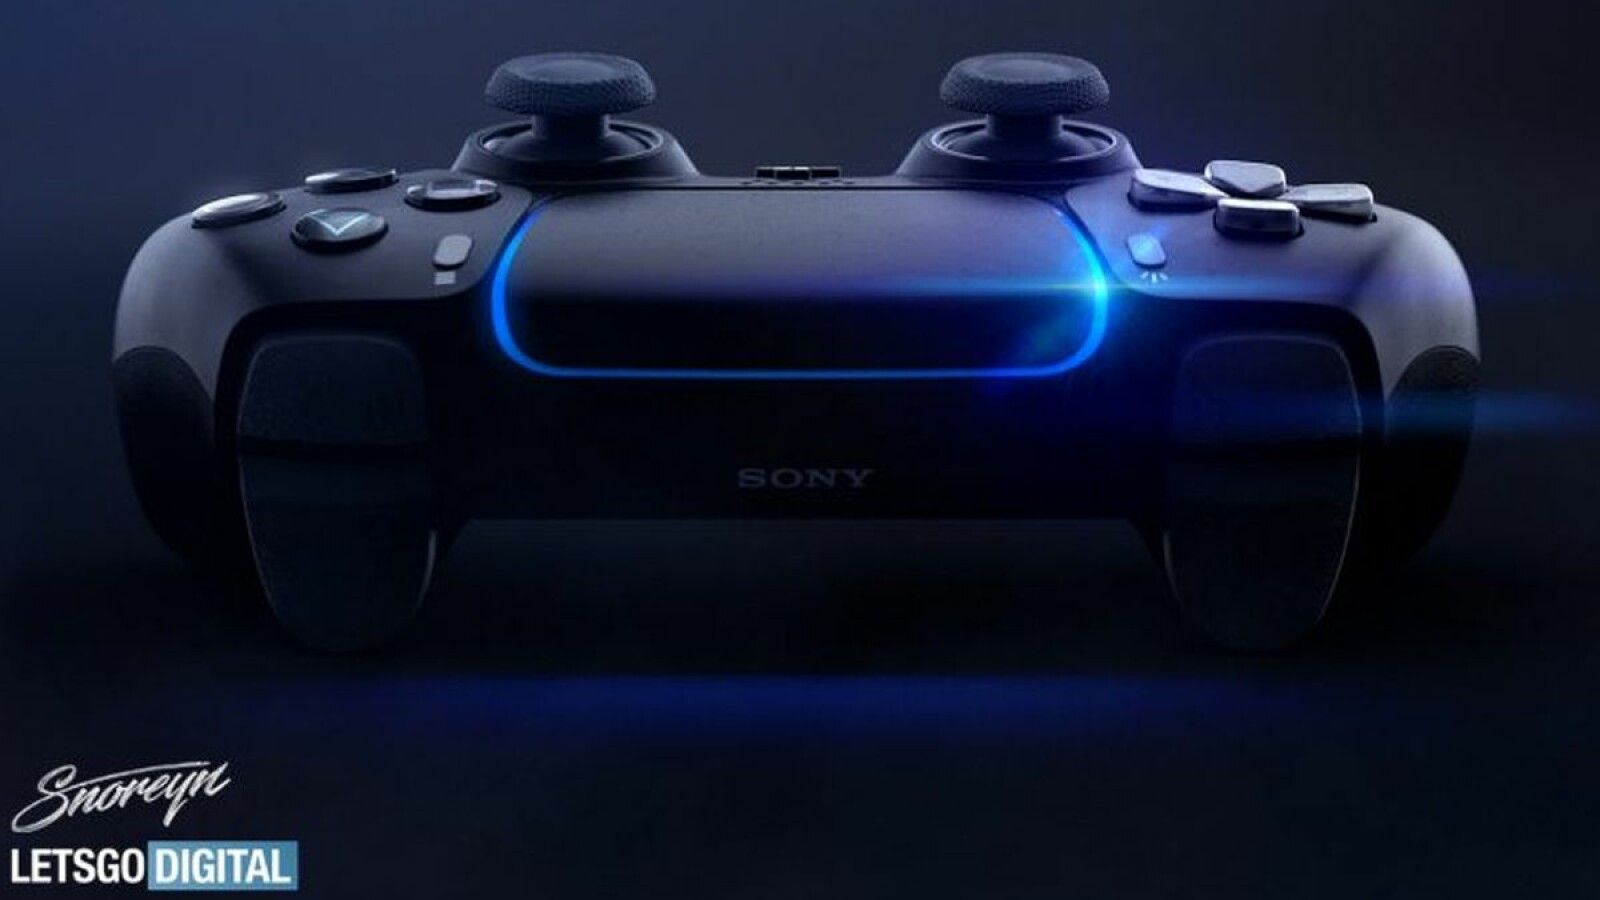 Black PS5: The concept shows the game console design that fans